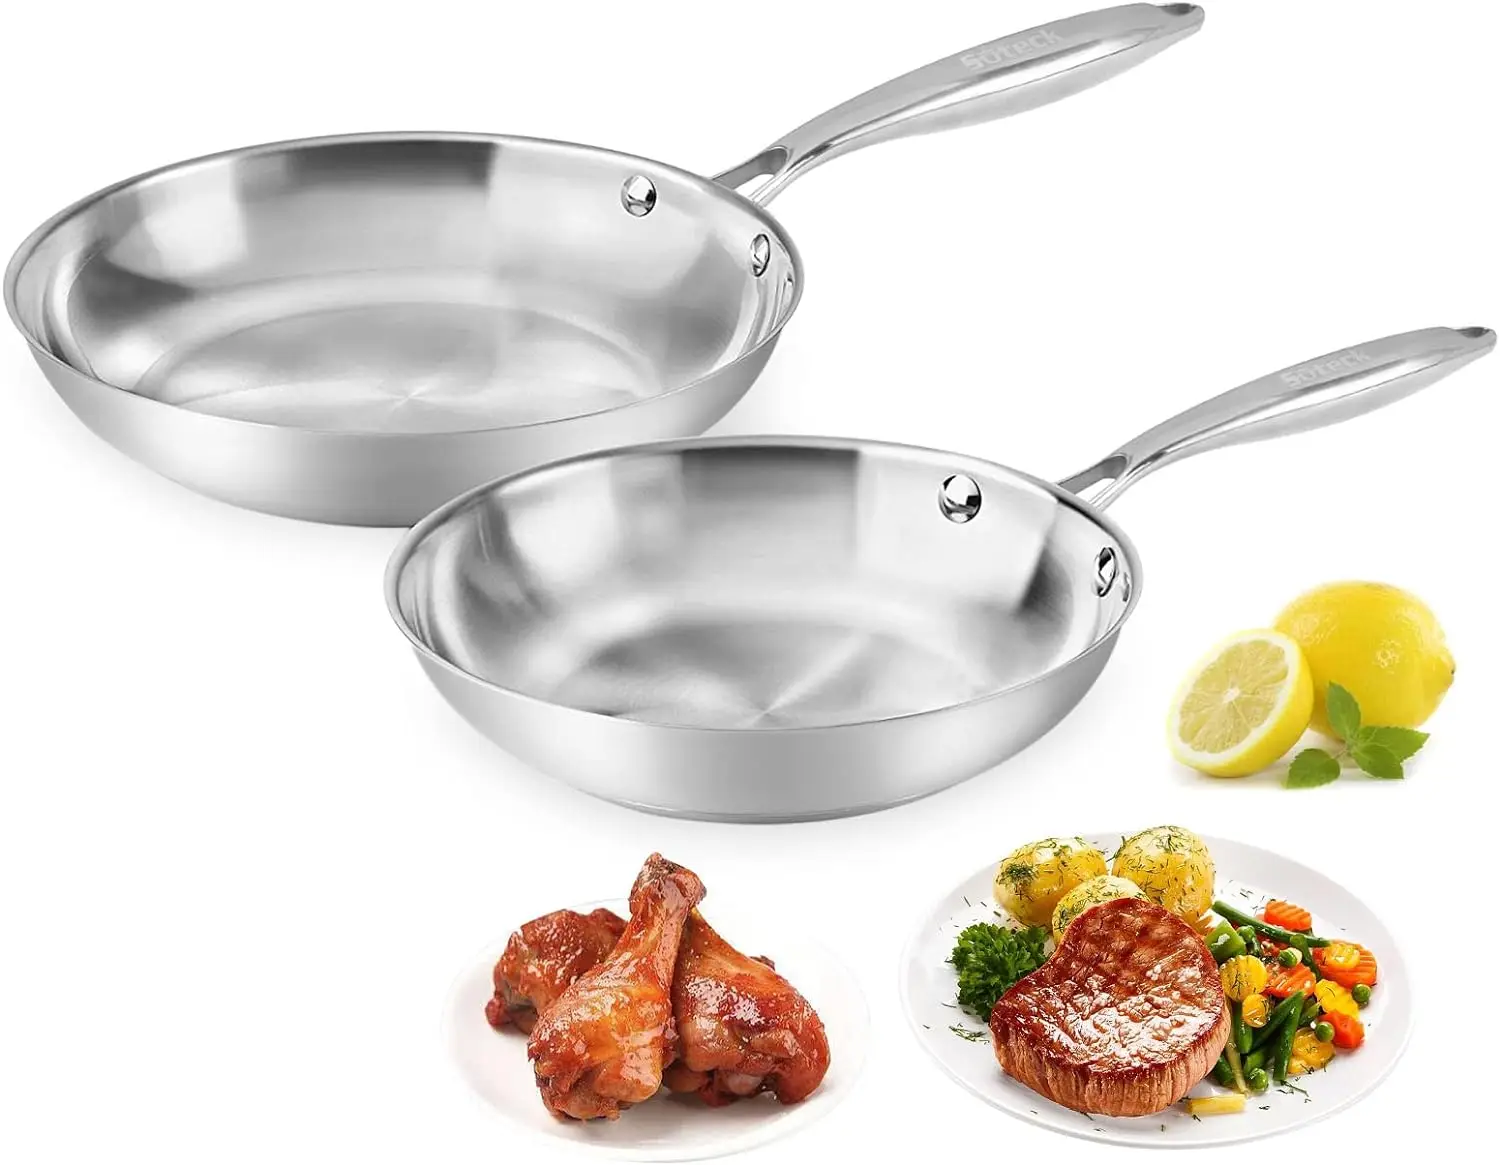 

Pan Set of 2 | 8" & 10" Tri-Ply Stainless Steel Frying Pan, Oven & Dishwasher Safe Classic Cooking Pan Cookware Plate for cookin